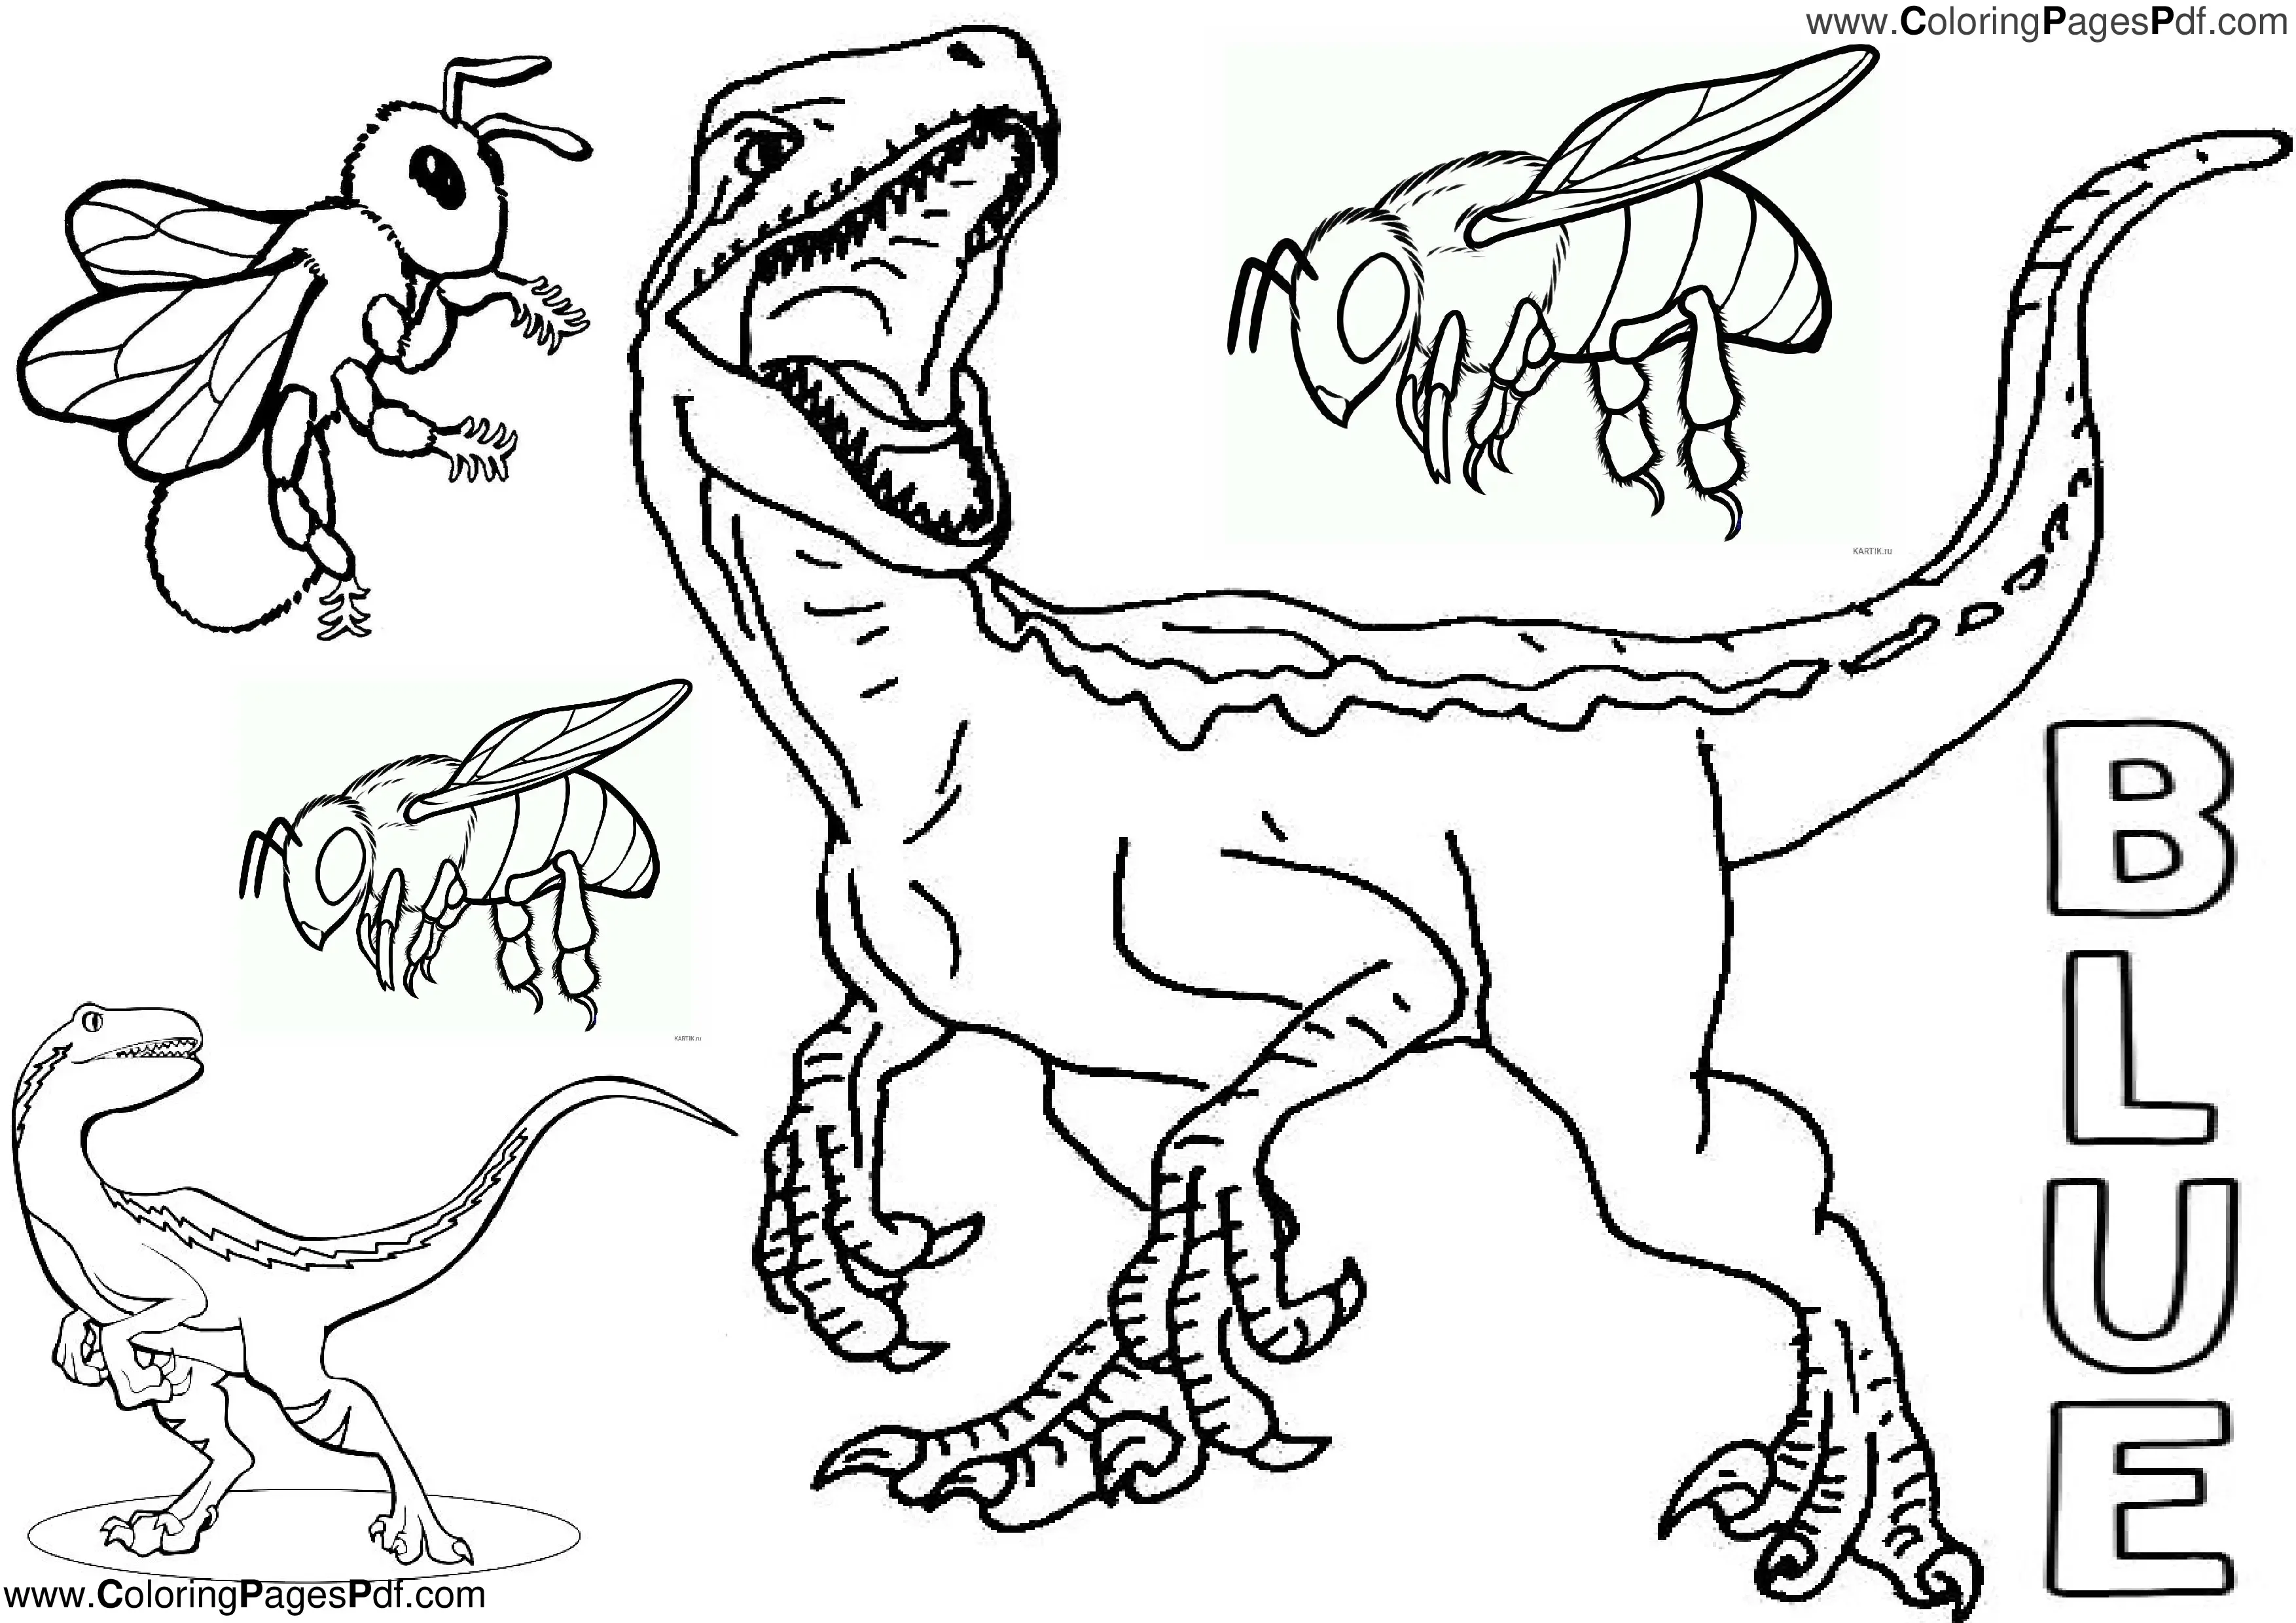 Jurassic world coloring pages blue